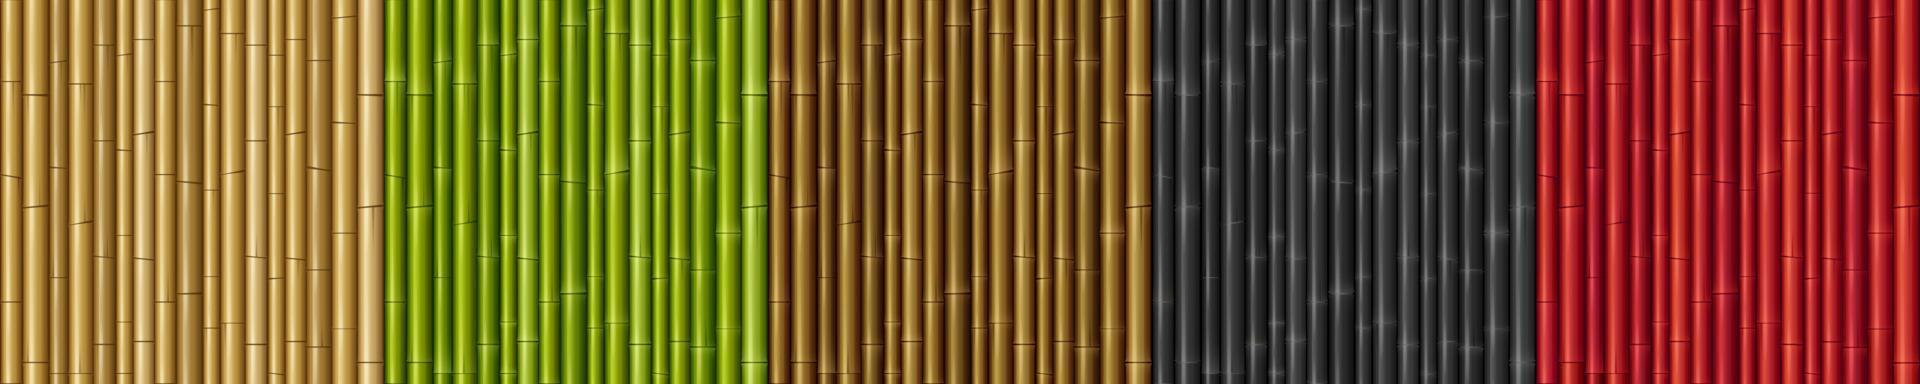 Textures of wall with bamboo sticks vector